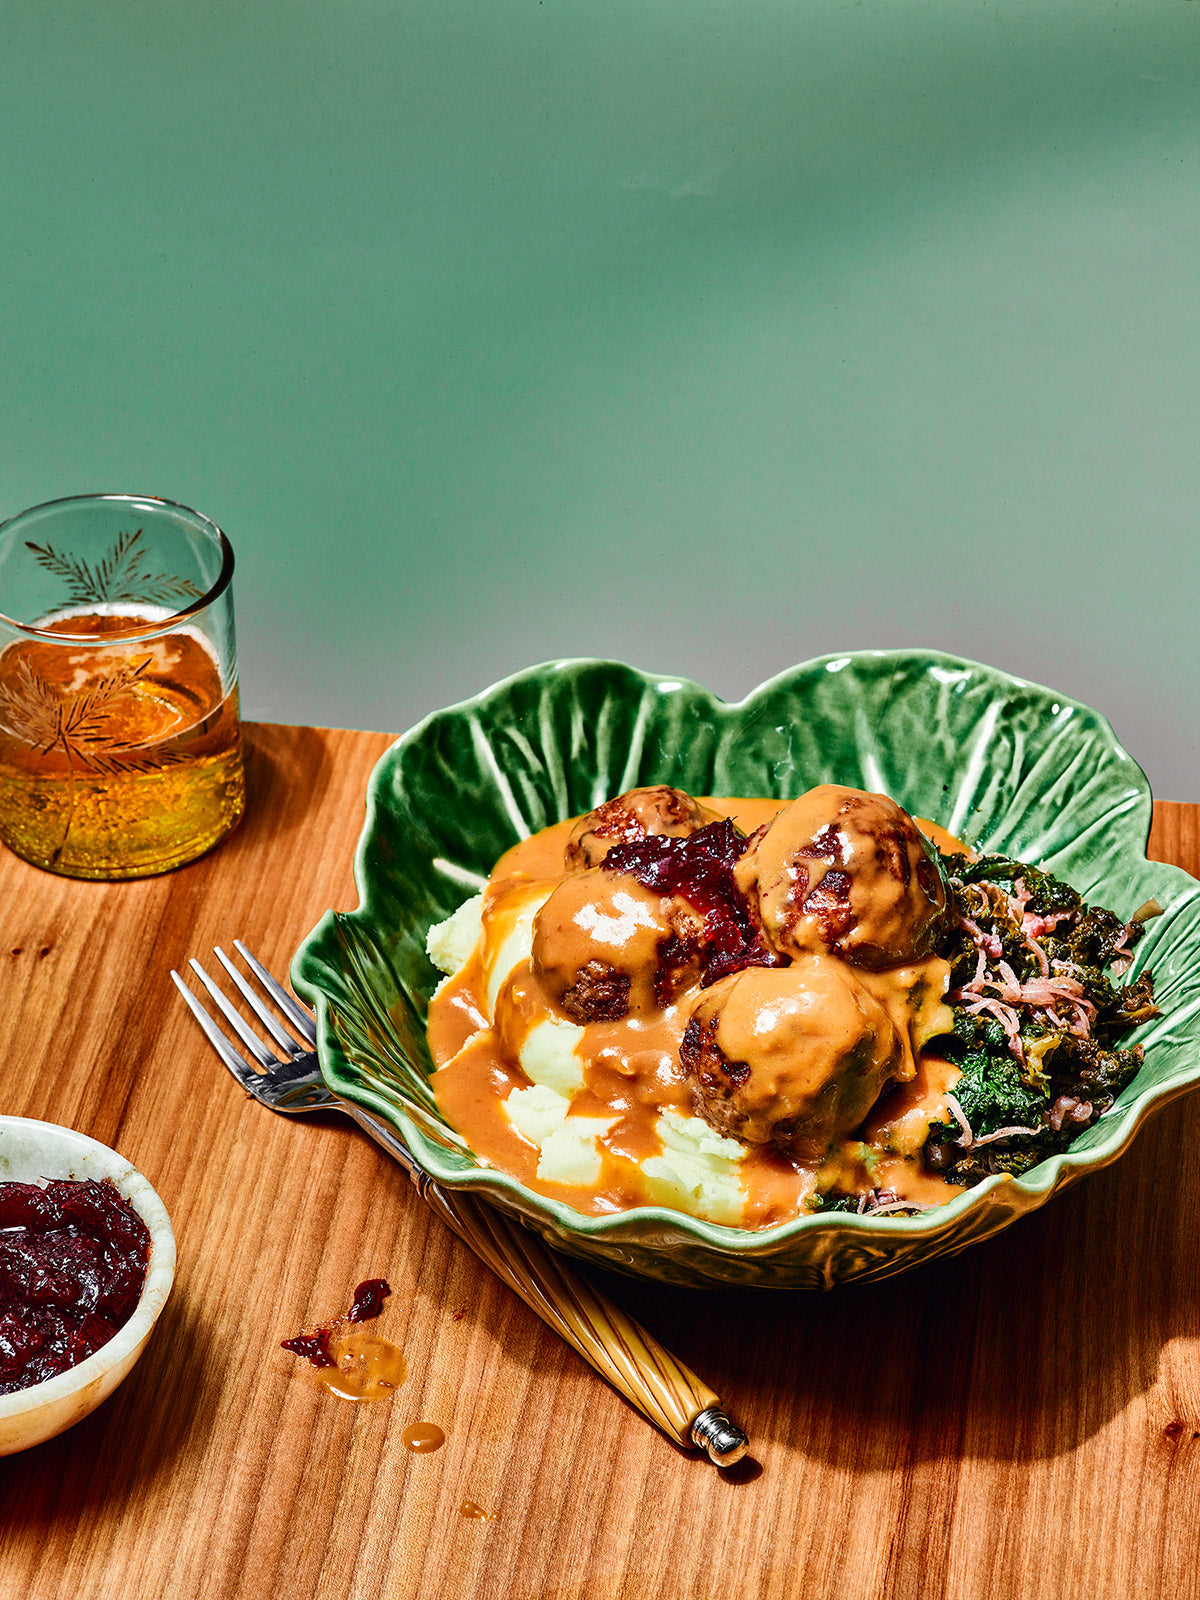 Swedish Style Meatballs with Mash, Braised Kale and Cranberry Sauce